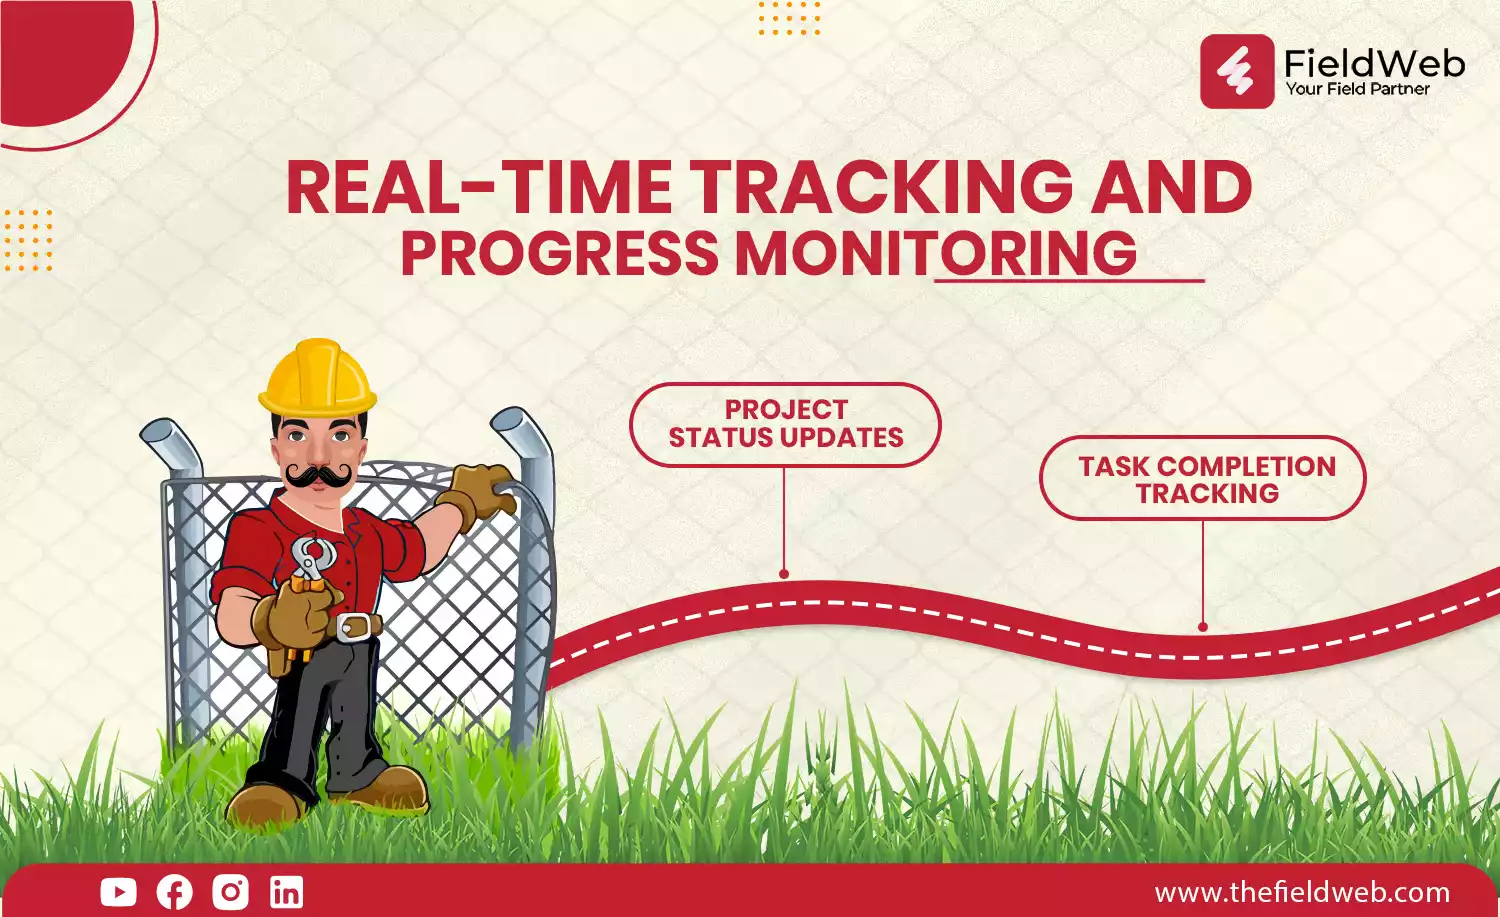 fieldweb mascot stand in grass with fence showing the real time tracking location with roadmap